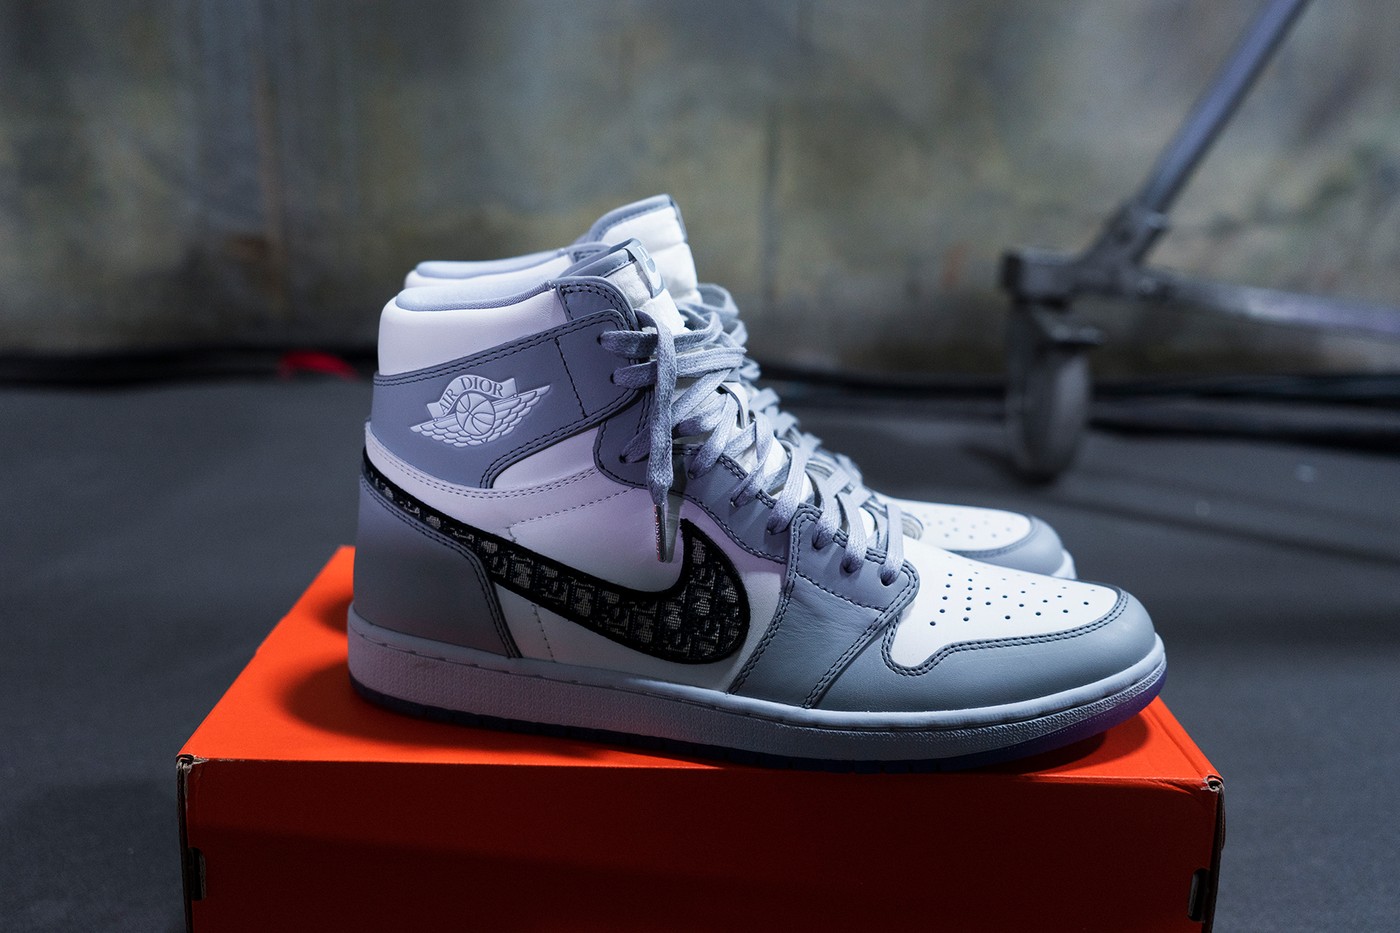 Official Image Dior x Air Jordan 1 High OG Inspiration and Discovery